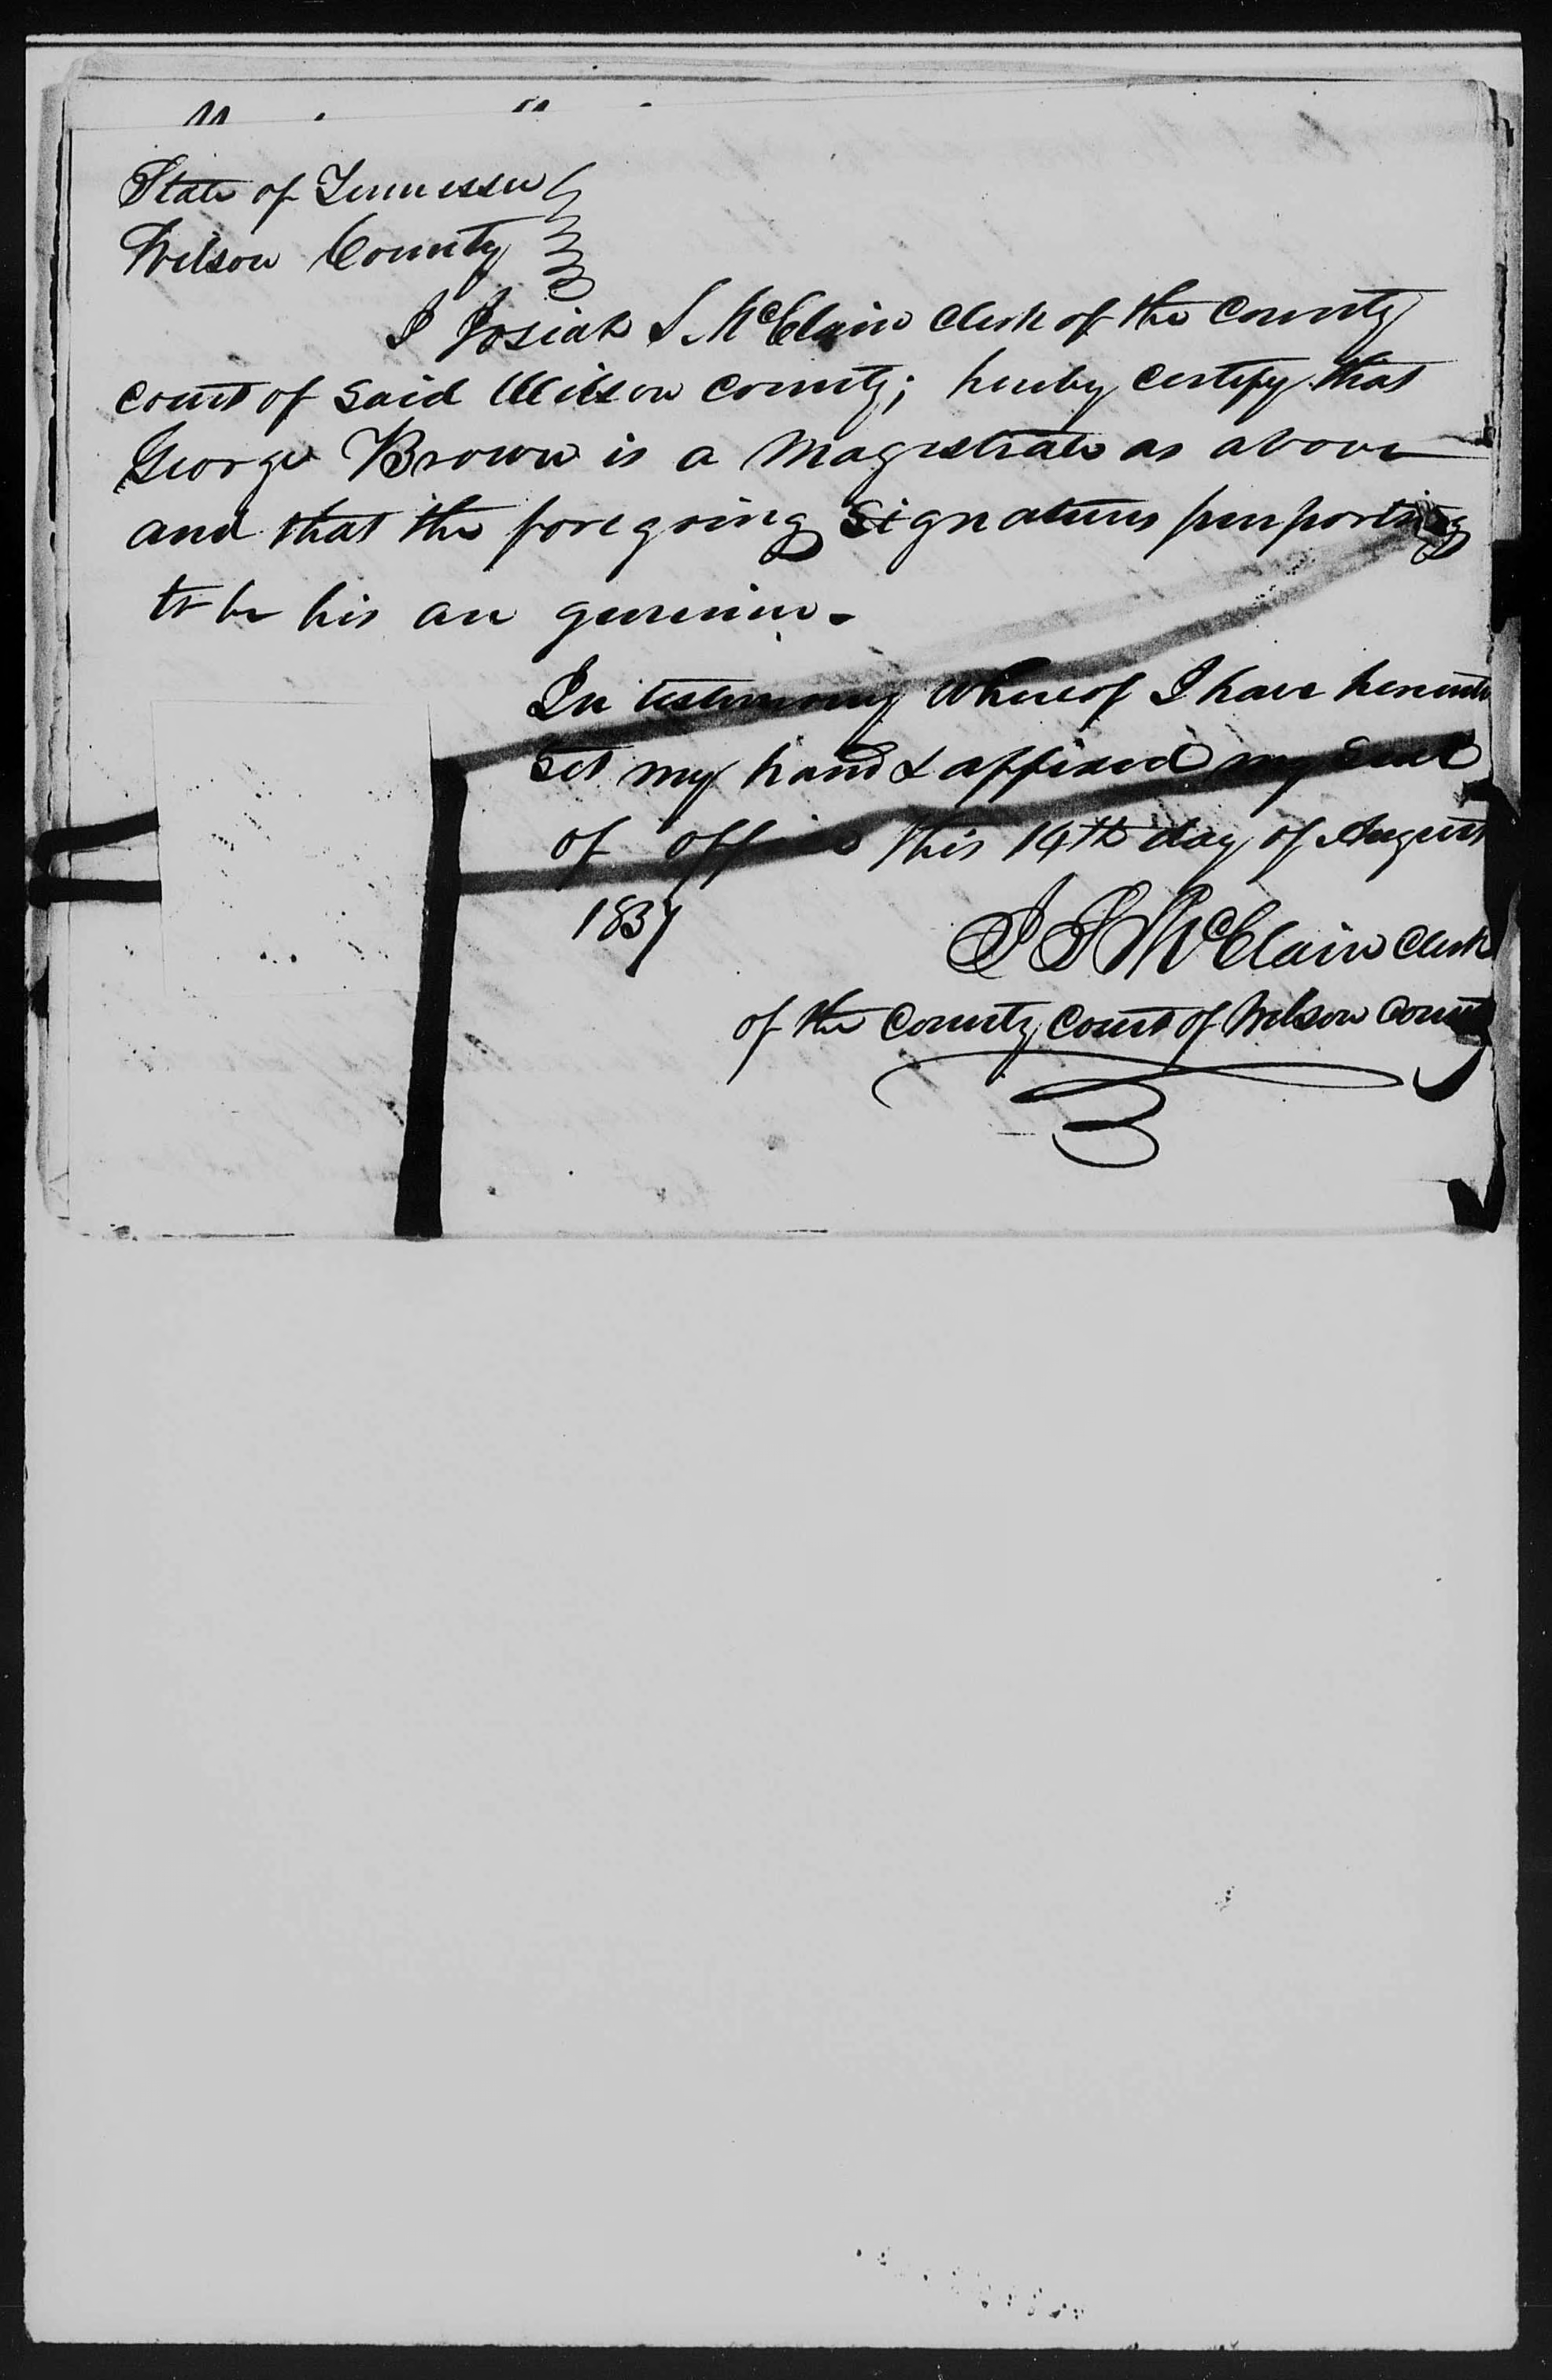 Affidavit of Alexander McMennamy in support of a Pension Claim for Rachel Debow, 14 August 1837, page 4